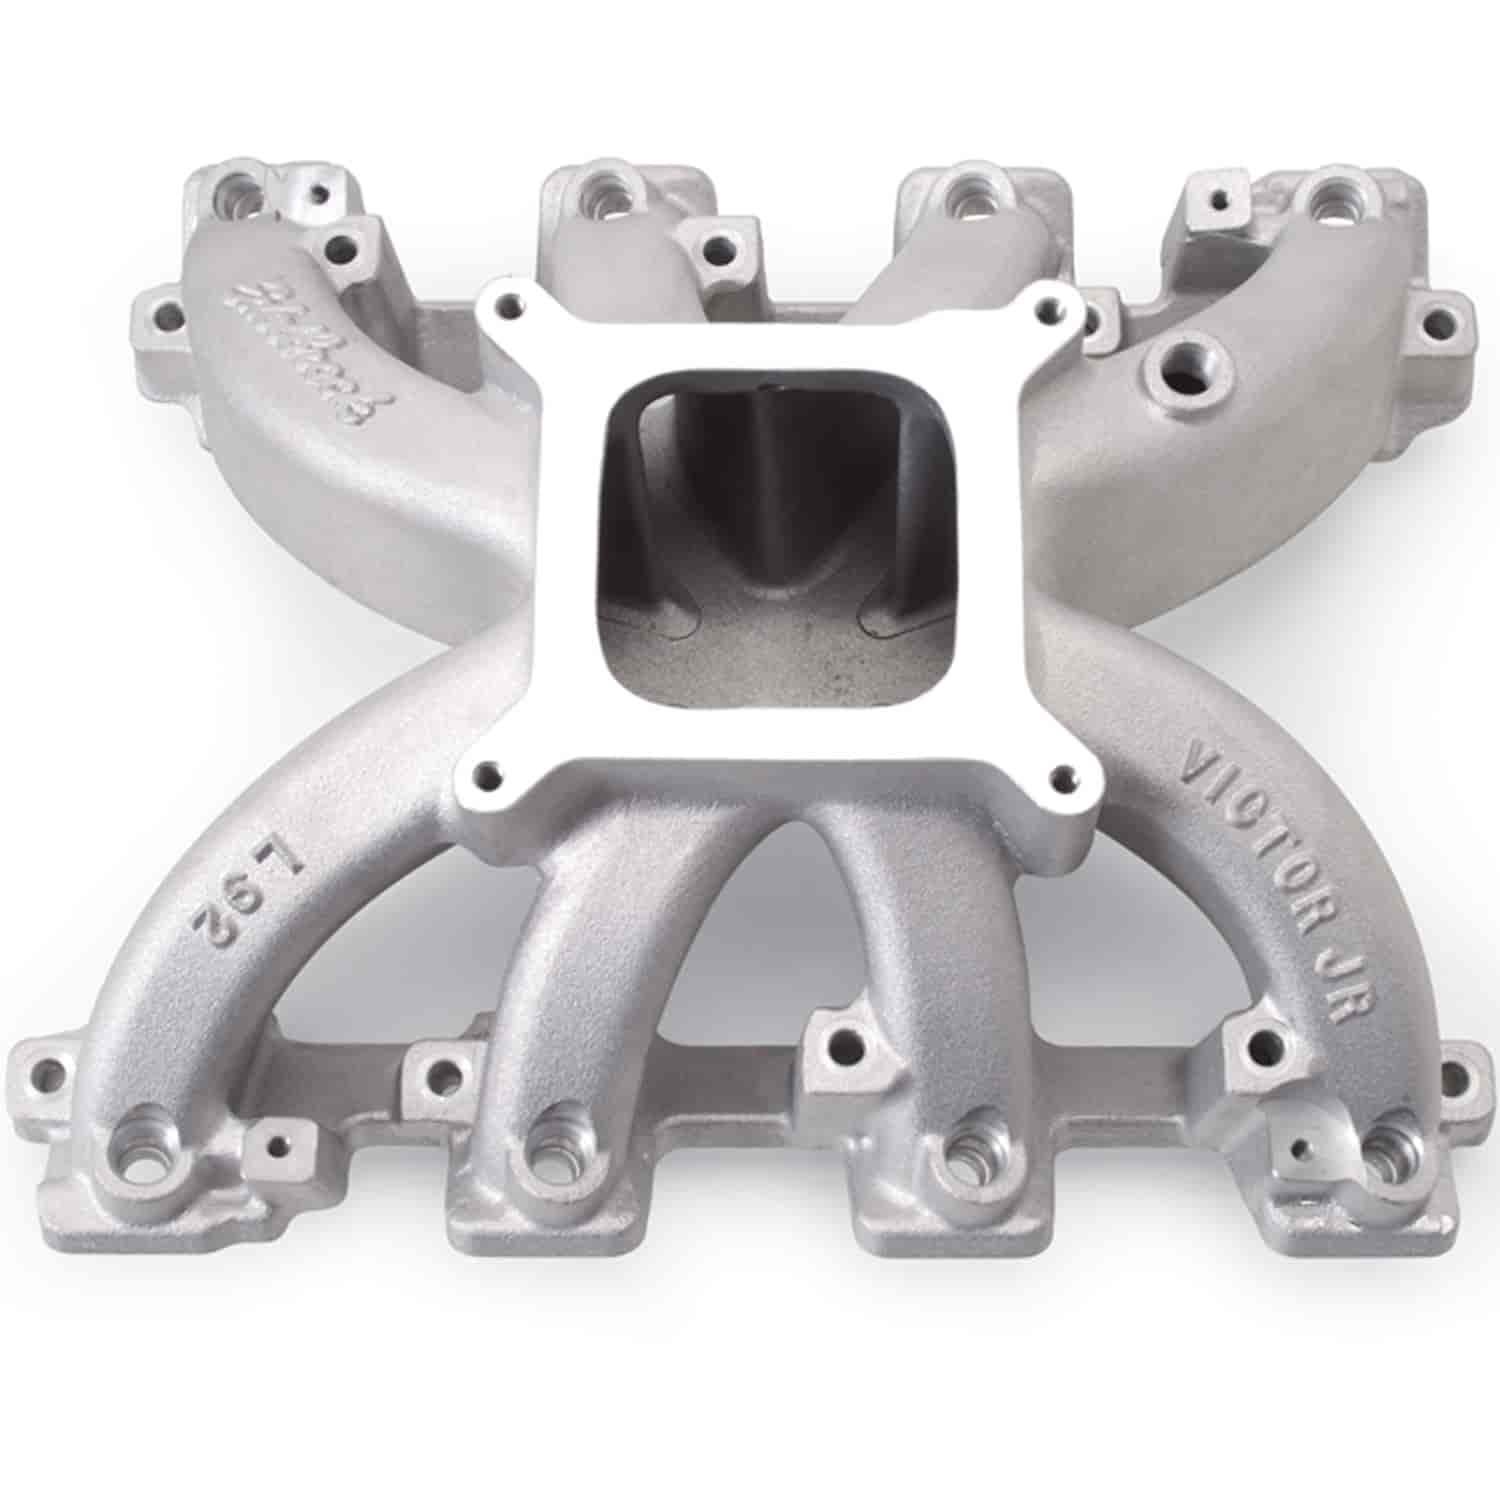 Victor Jr. L76/L92/LS3 EFI Intake Manifold Chevy LS with L92 Cylinder Heads